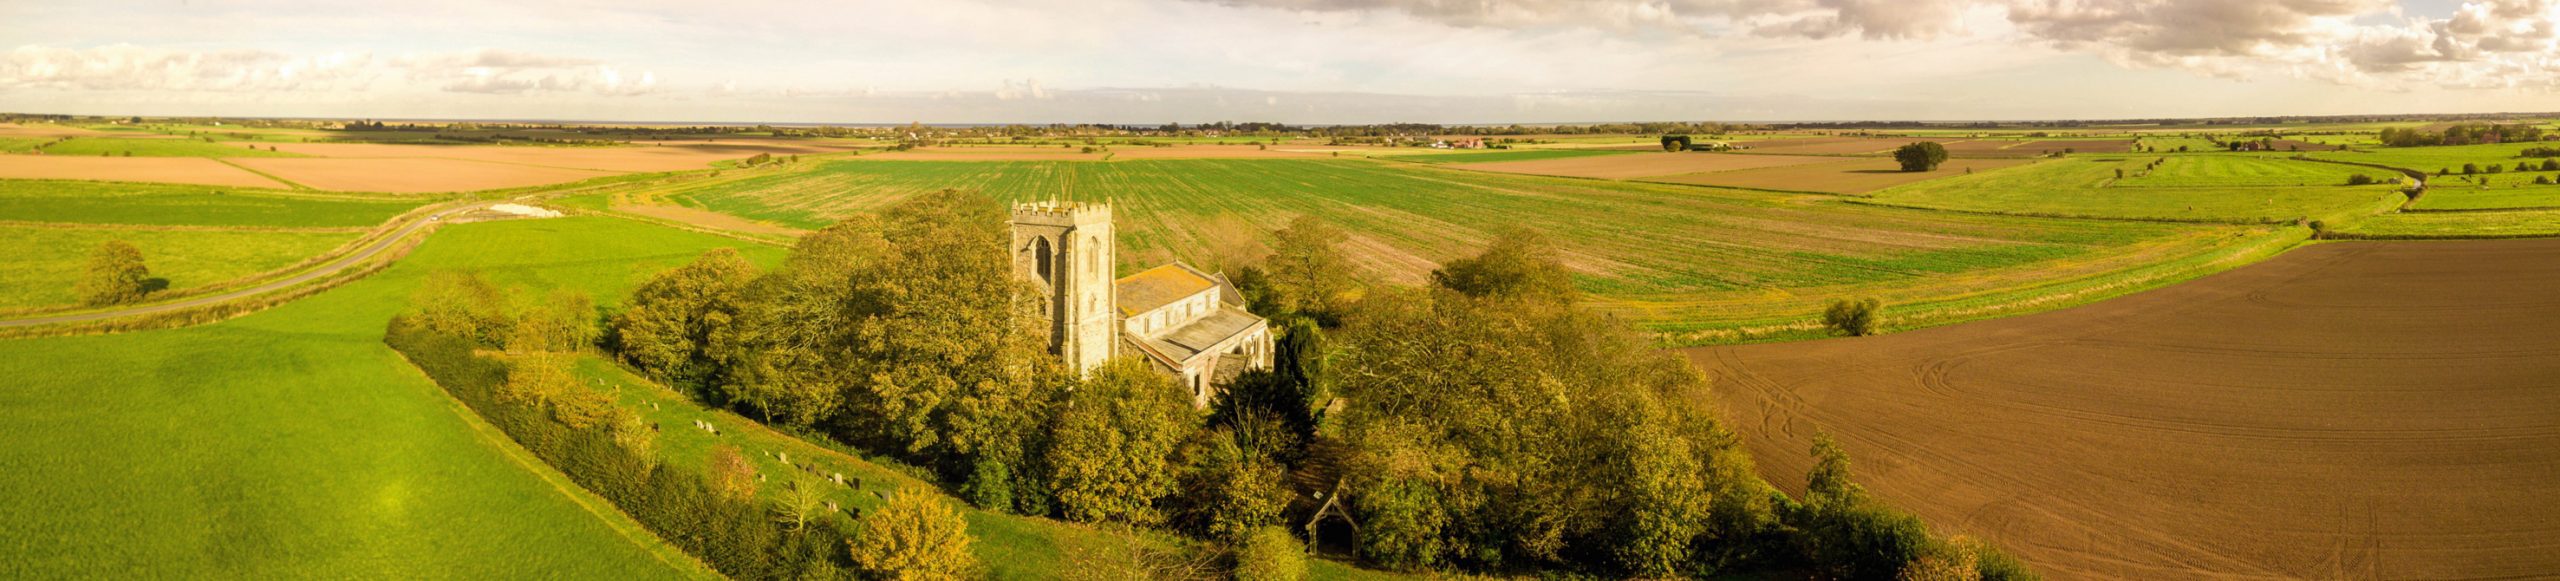 Aerial view of a church in surrounded by countryside